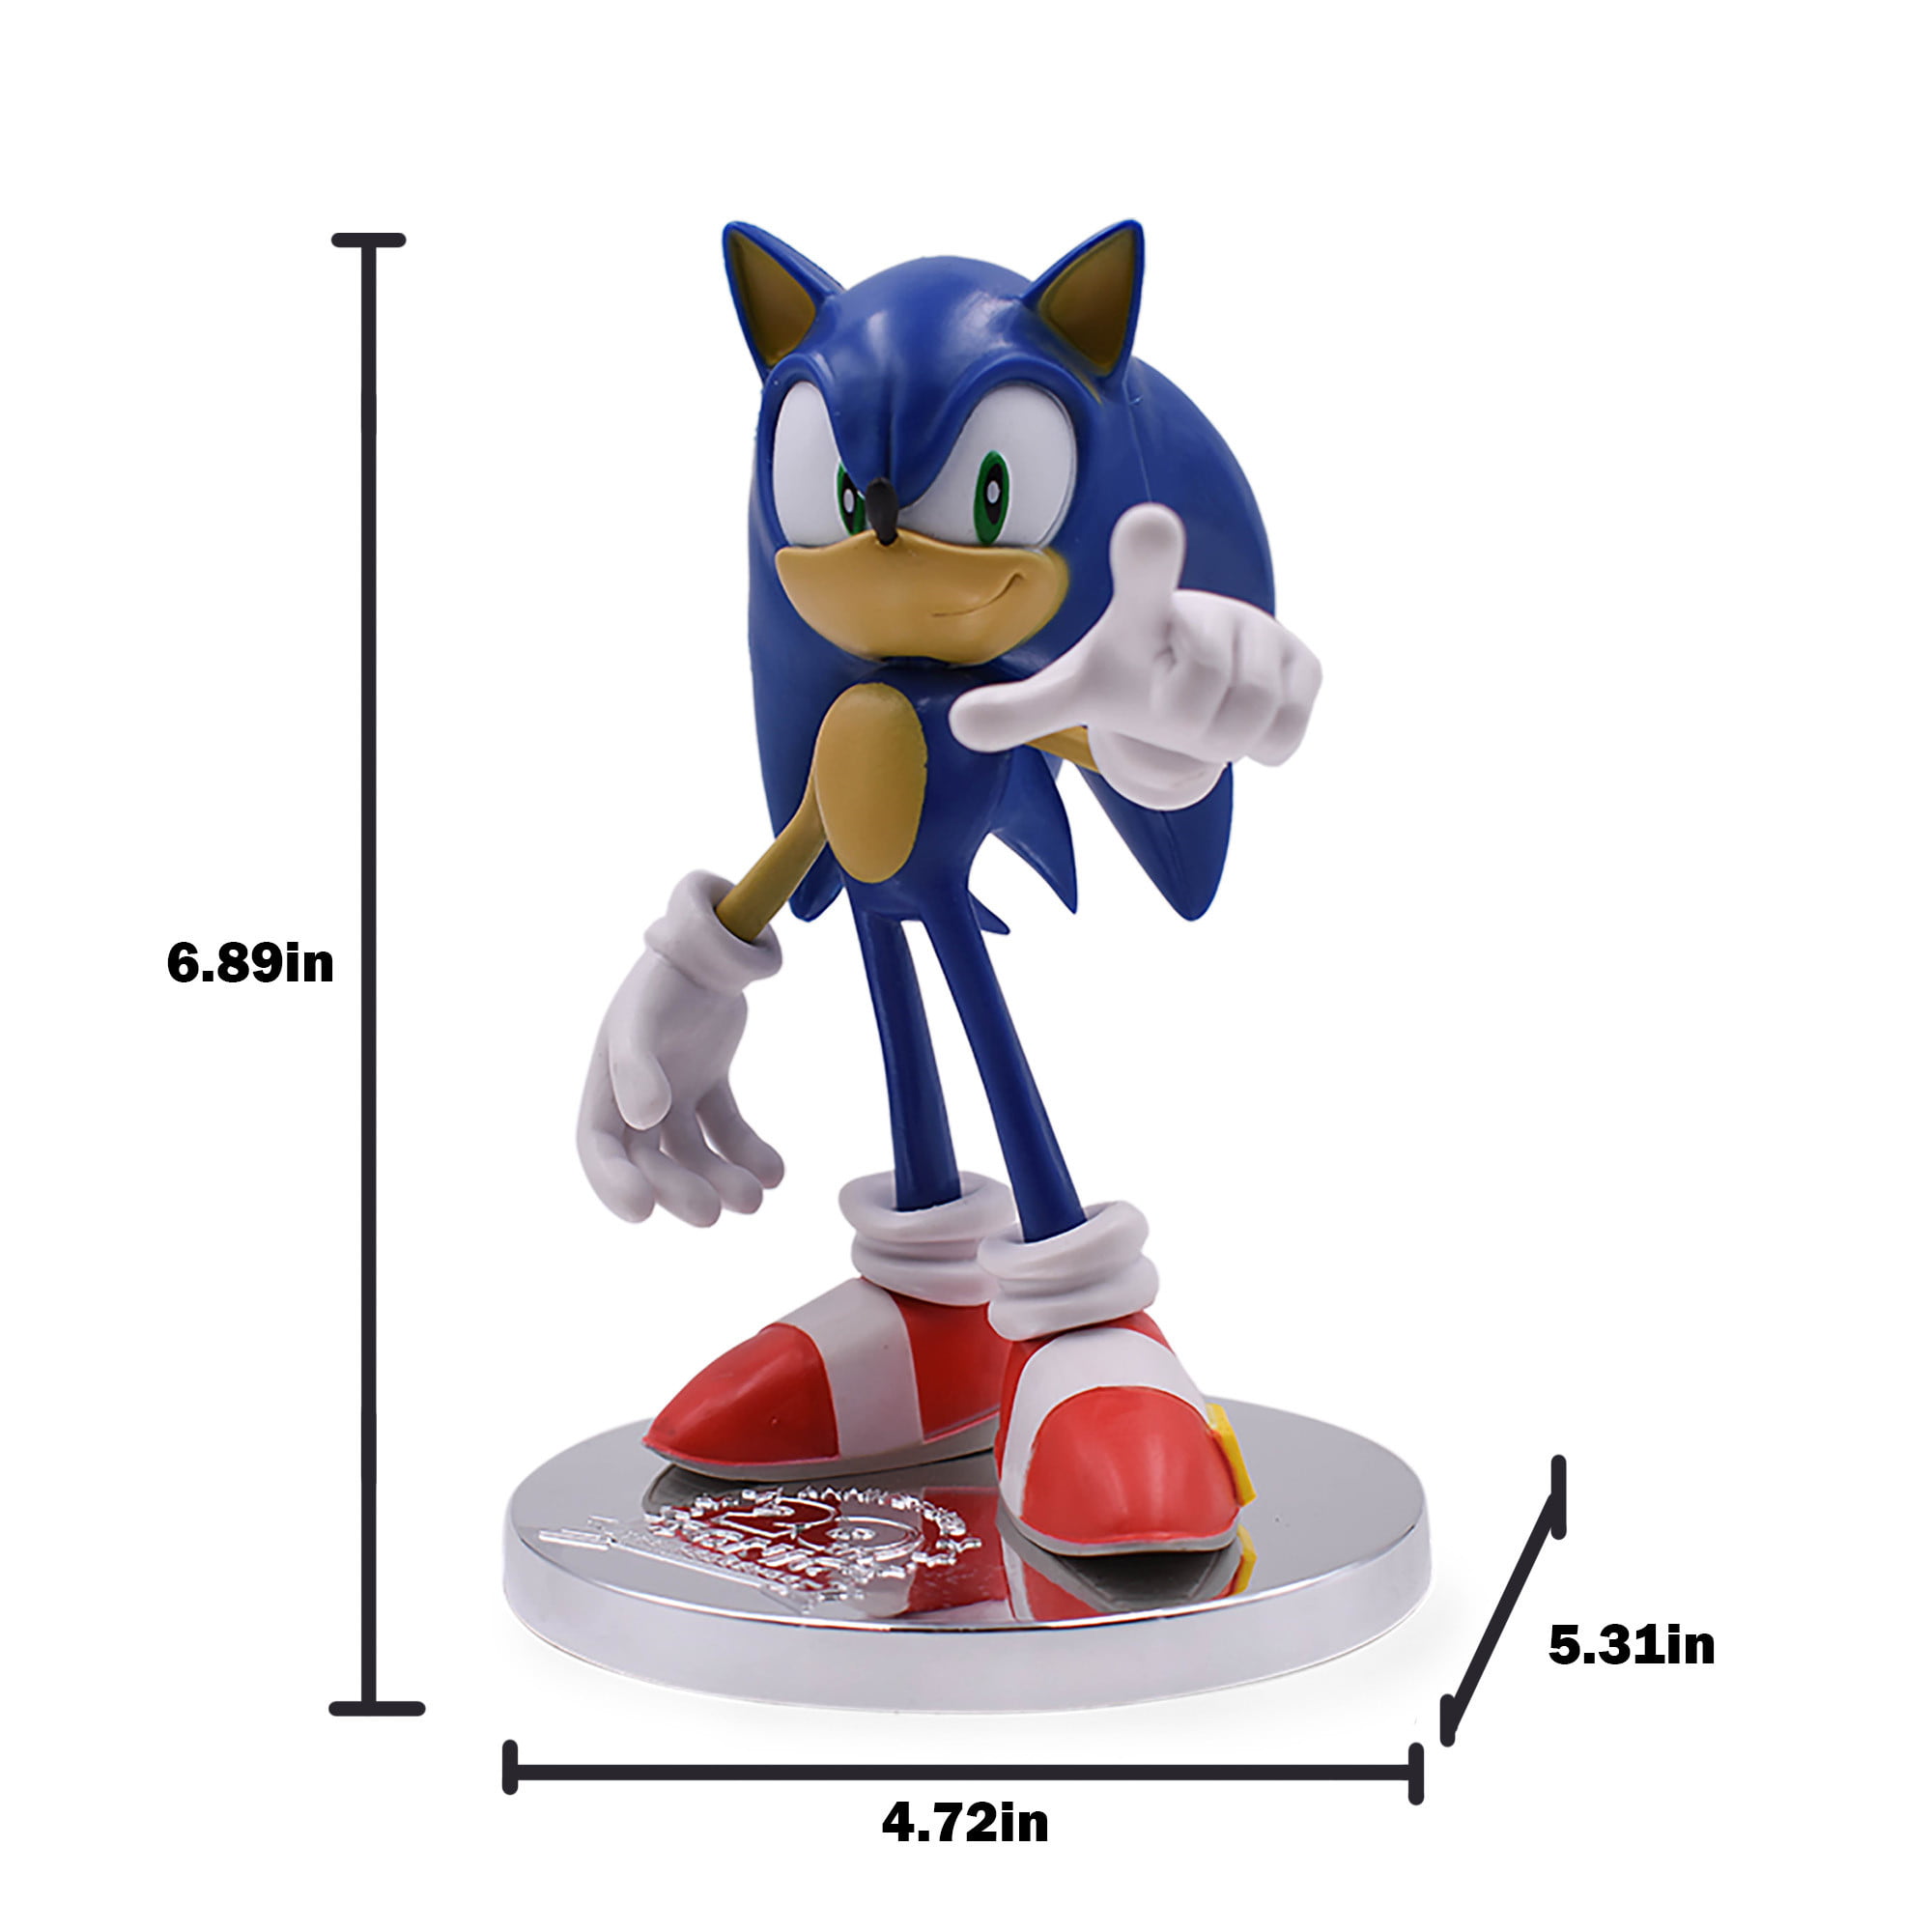 Sonic The Hedgehog 6PCS PVC Game Toy Action Figure Model Doll Kids Xmas Gift Toy 